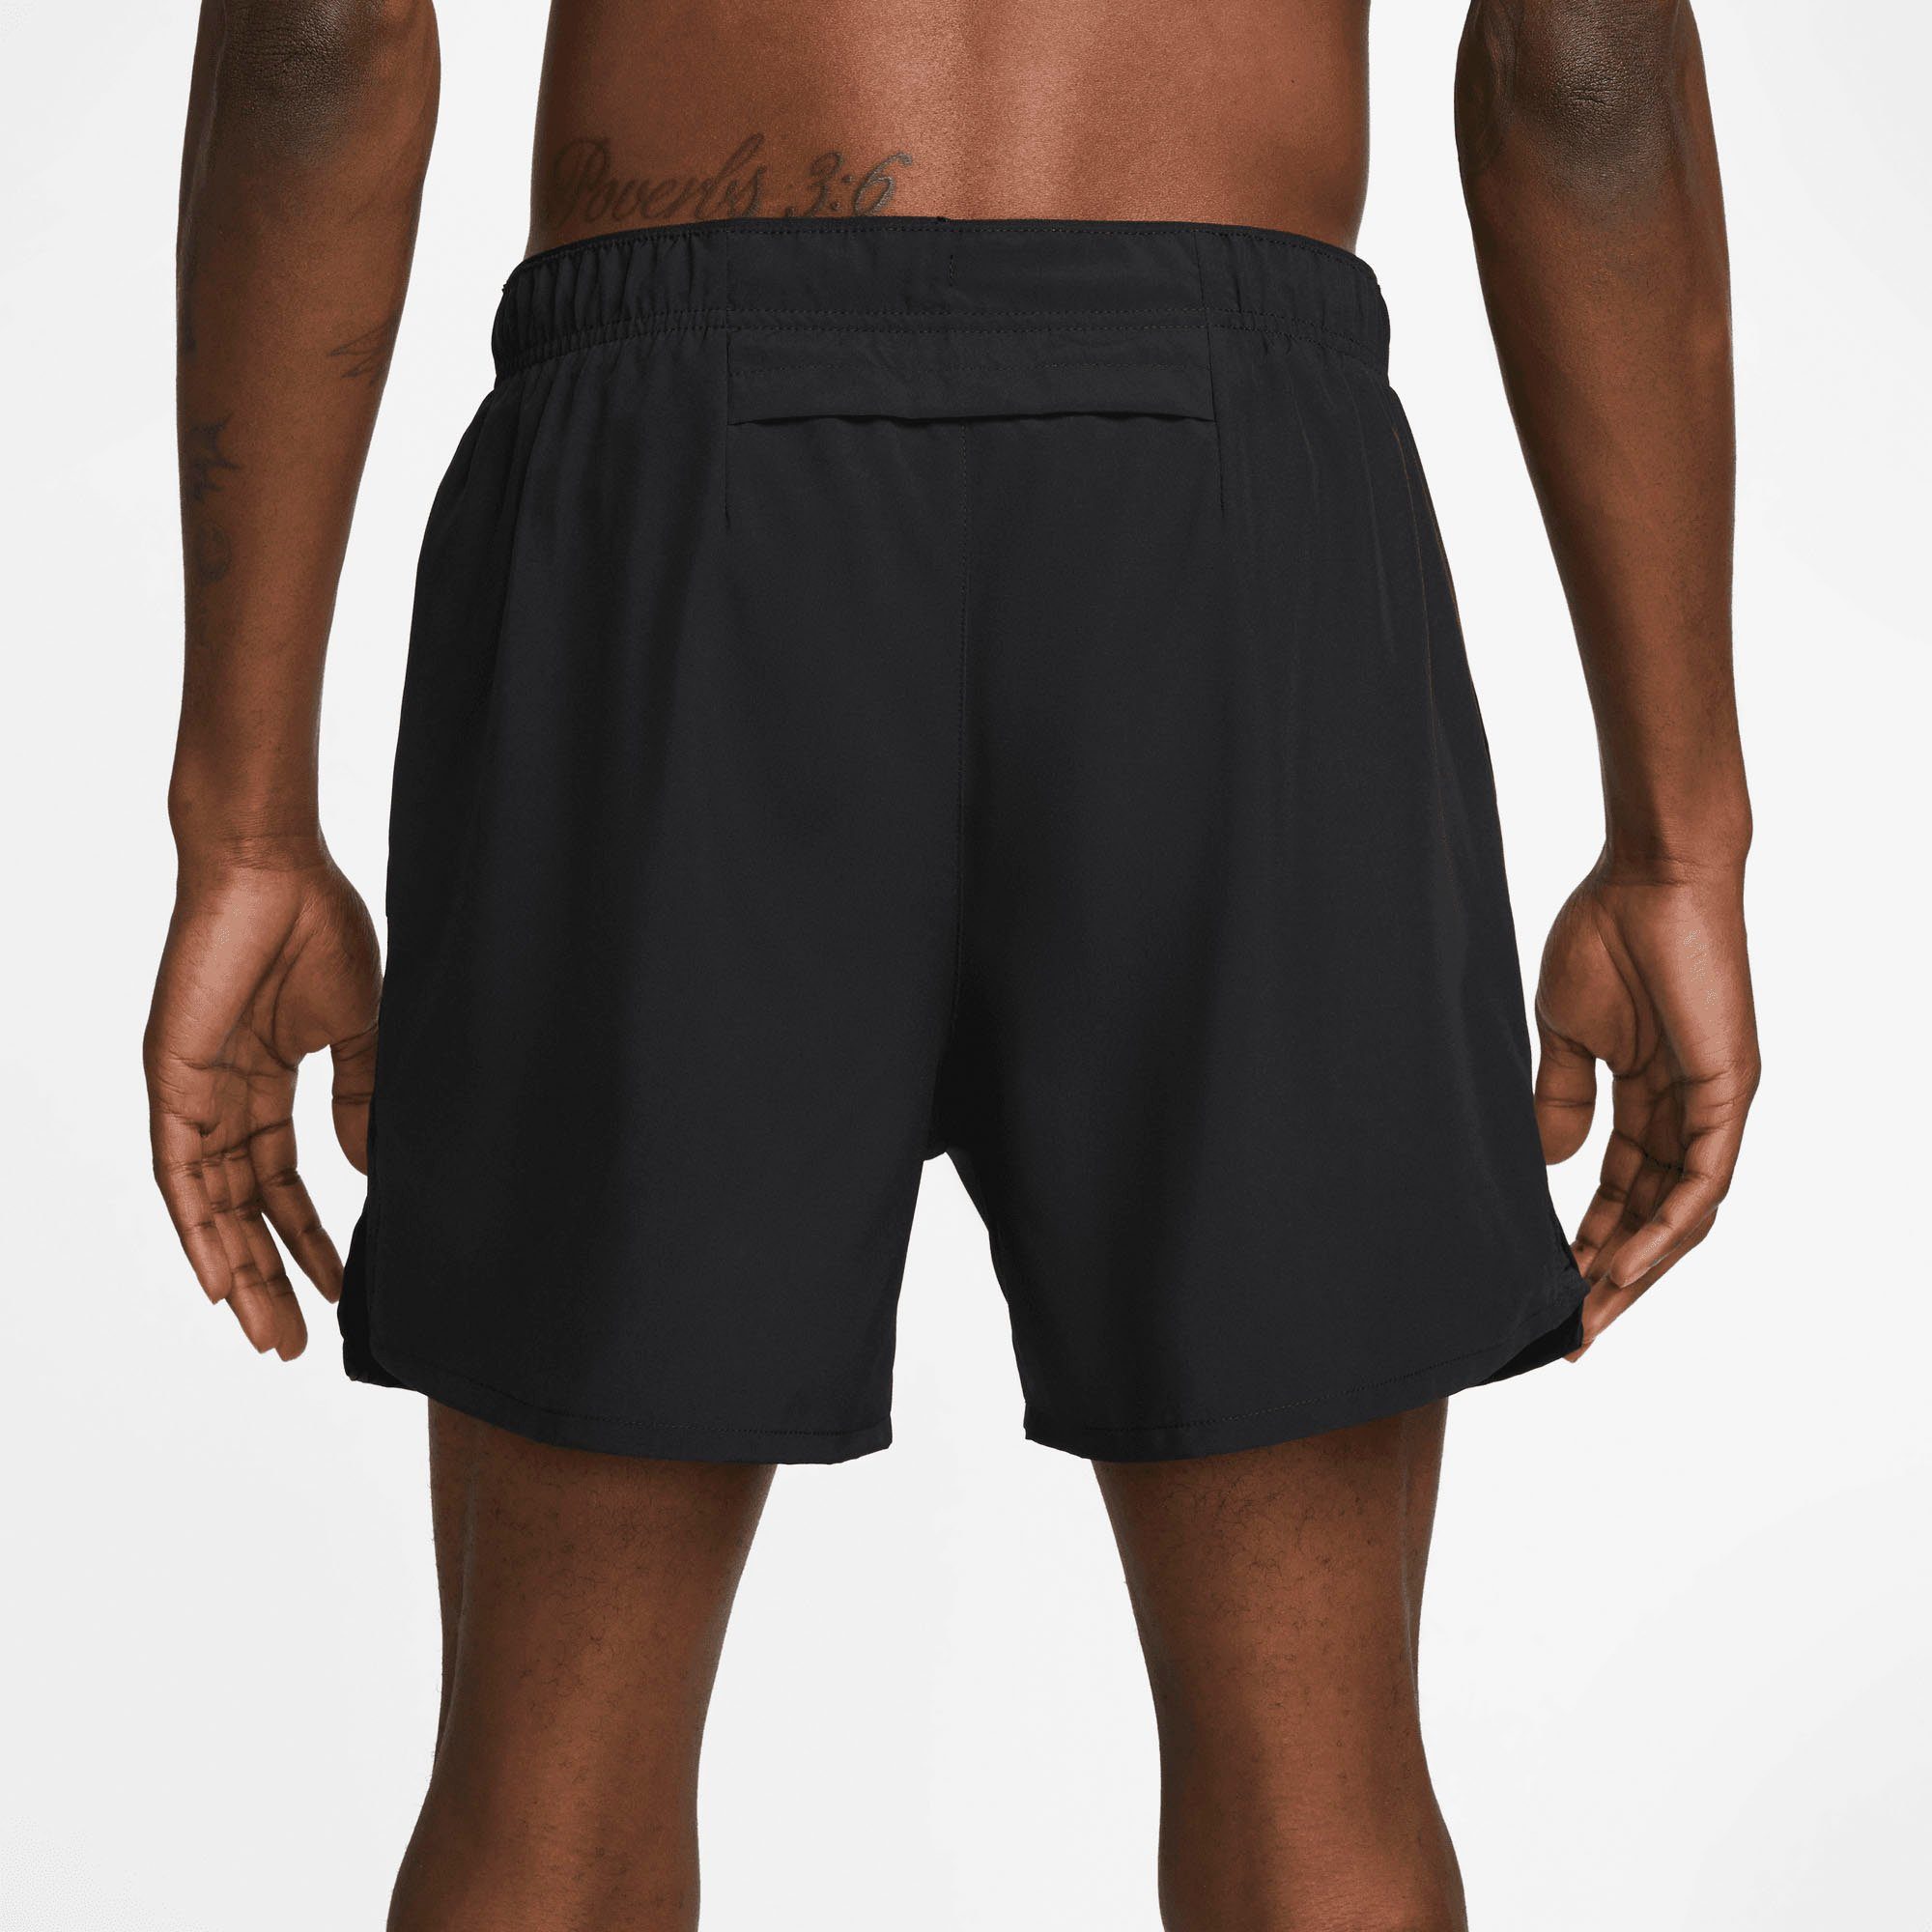 Nike Laufshorts Dri-FIT Challenger Shorts " Brief-Lined Men's Running